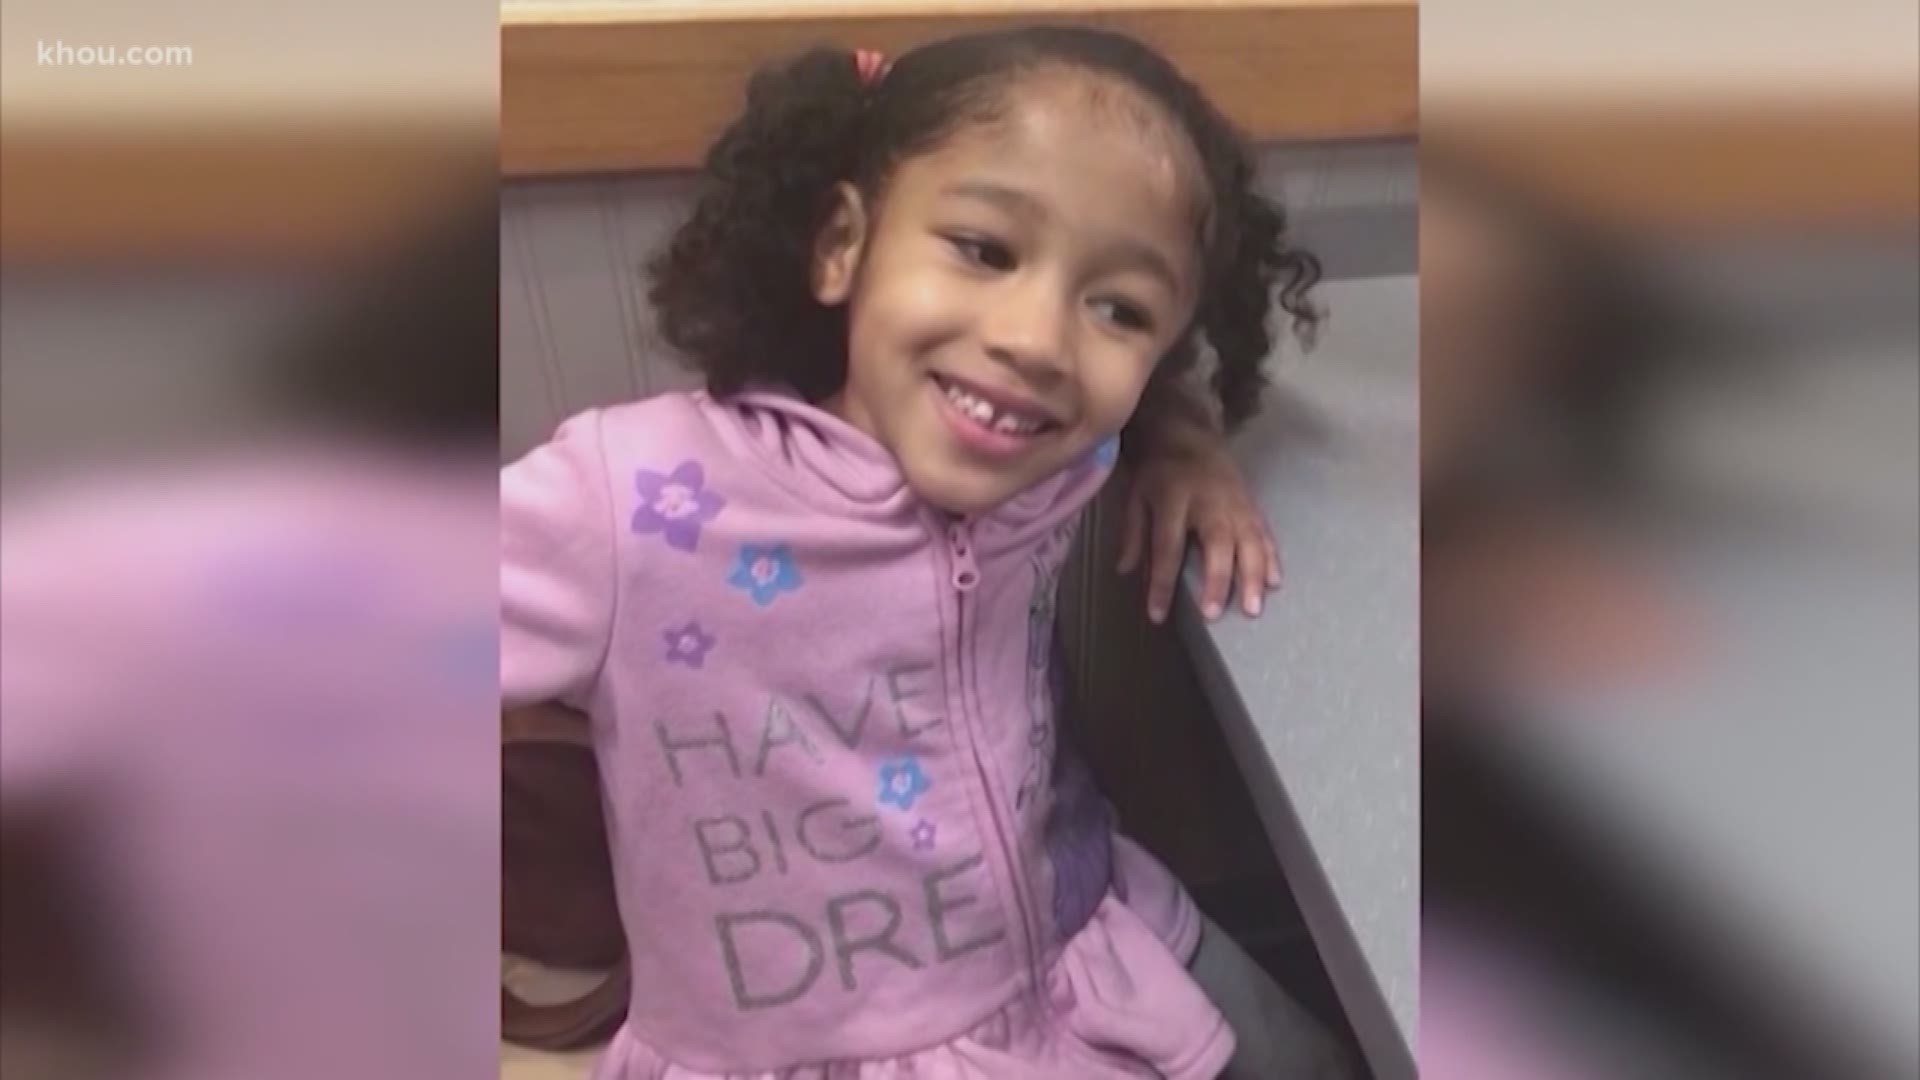 KHOU 11 legal expert Gerald Treece said he expects Derion Vence will be charged with first degree murder after Maleah Davis’ remains were found in Arkansas.